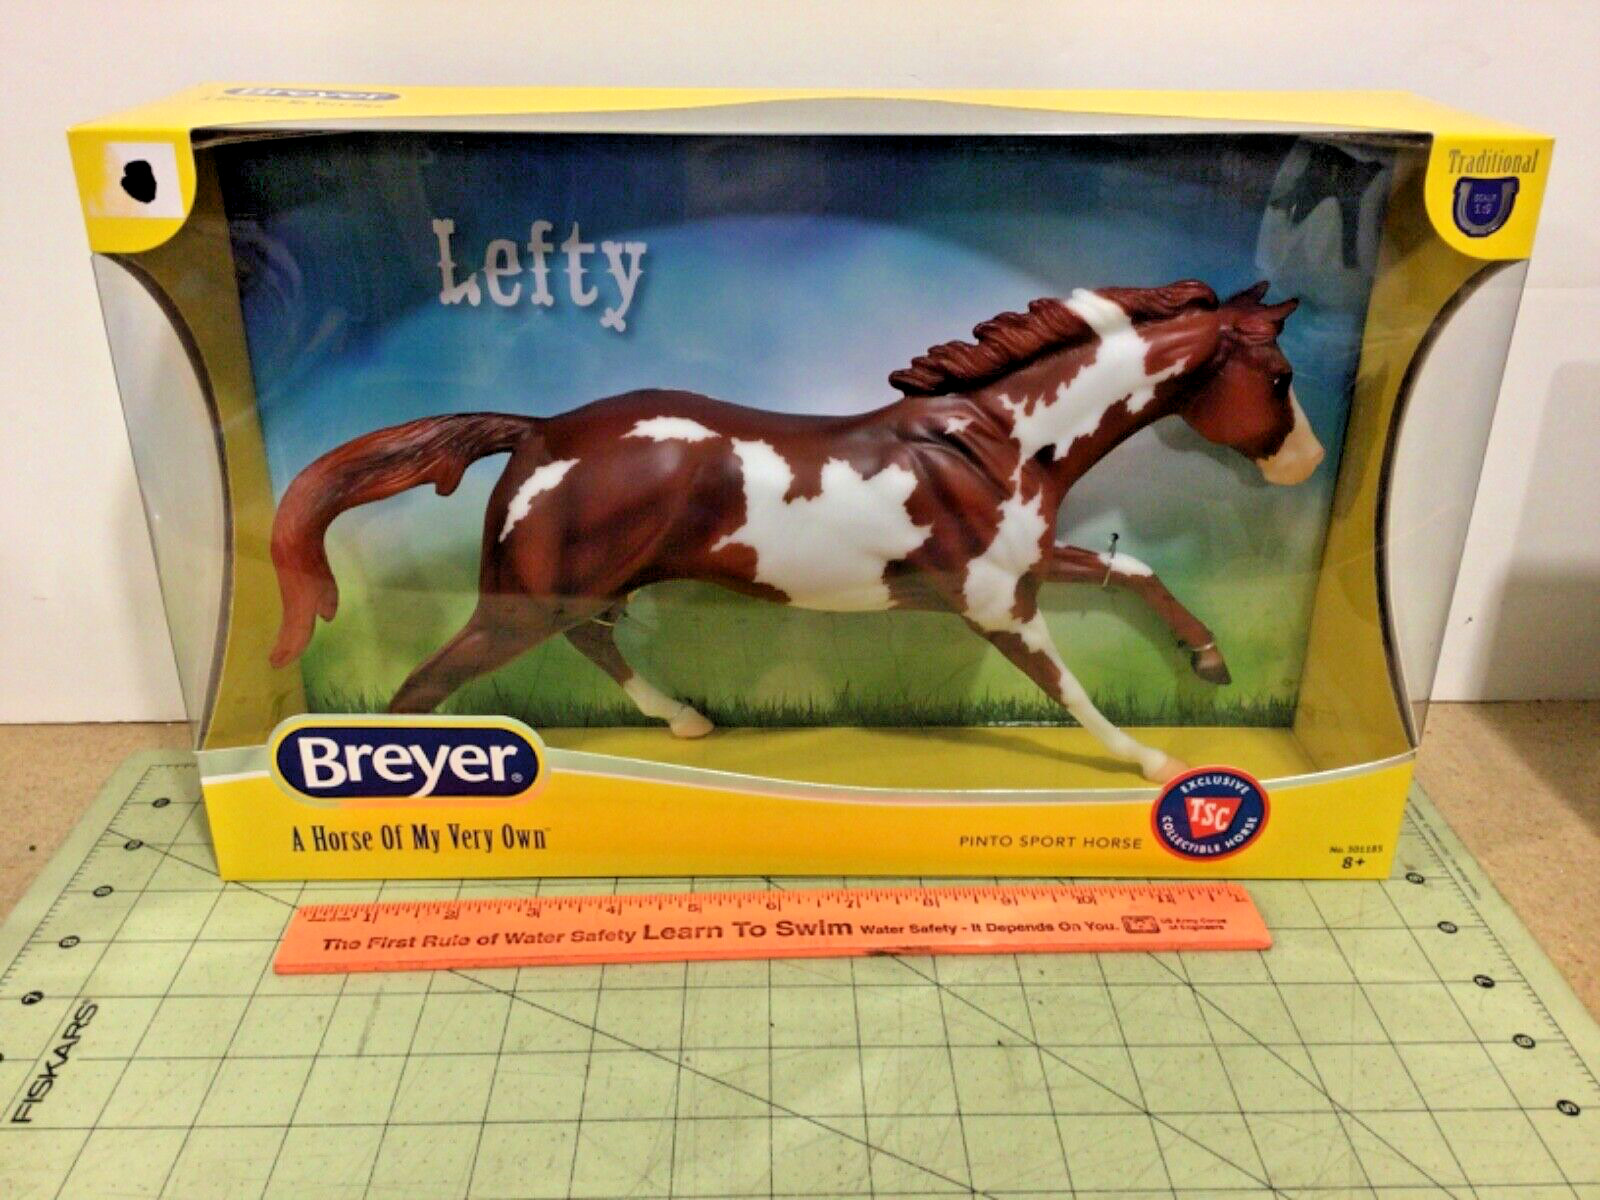 Breyer TSC Exclusive Lefty Pinto Sport Horse Limited Edition 1:9 scale